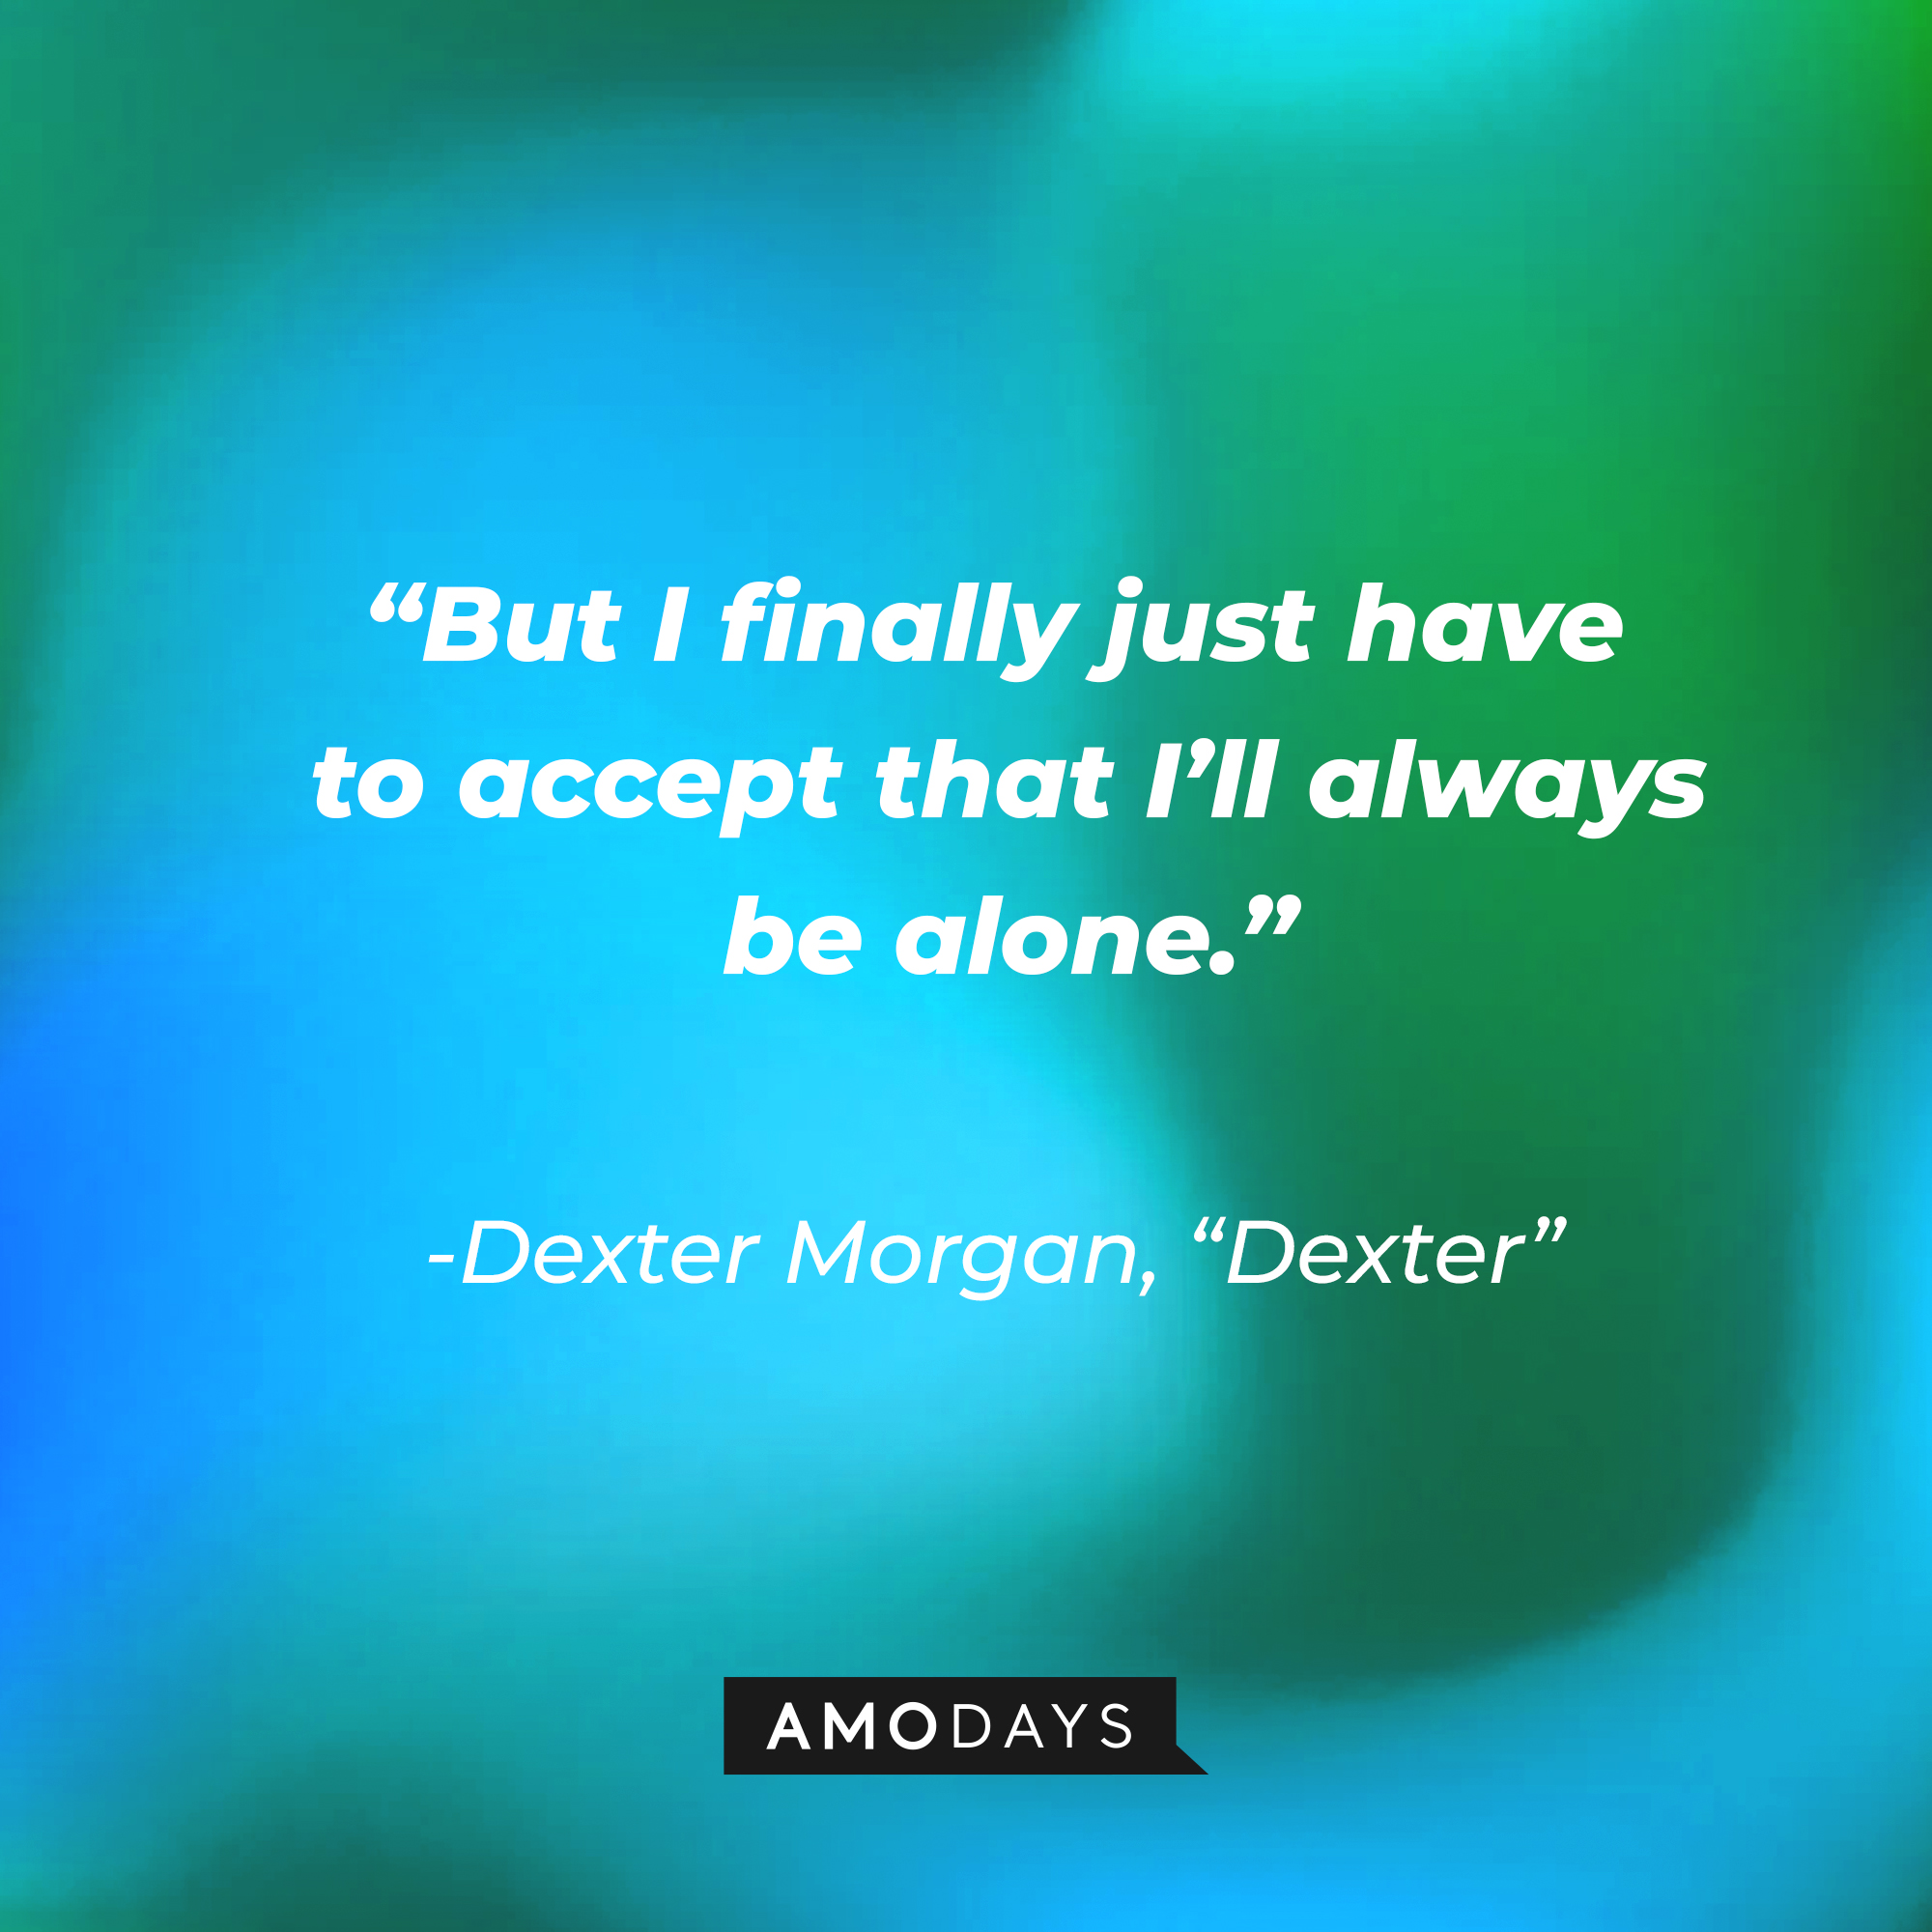 Dexter Morgan's quote from "Dexter:" "But I finally just have to accept that I’ll always be alone.” | Source: AmoDays